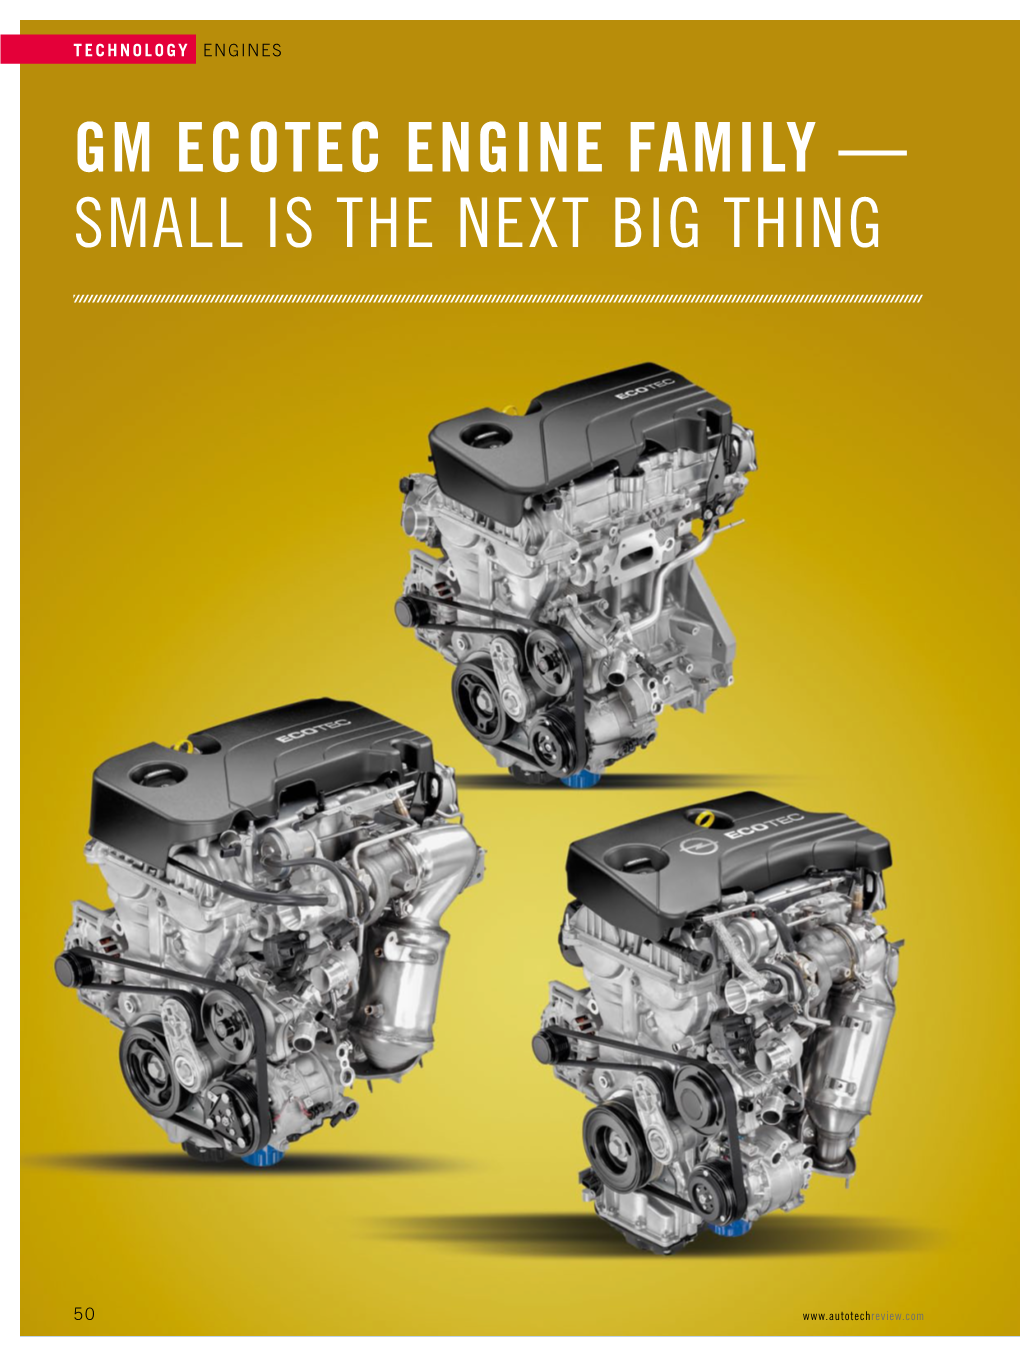 Gm Ecotec Engine Family — Small Is the Next Big Thing